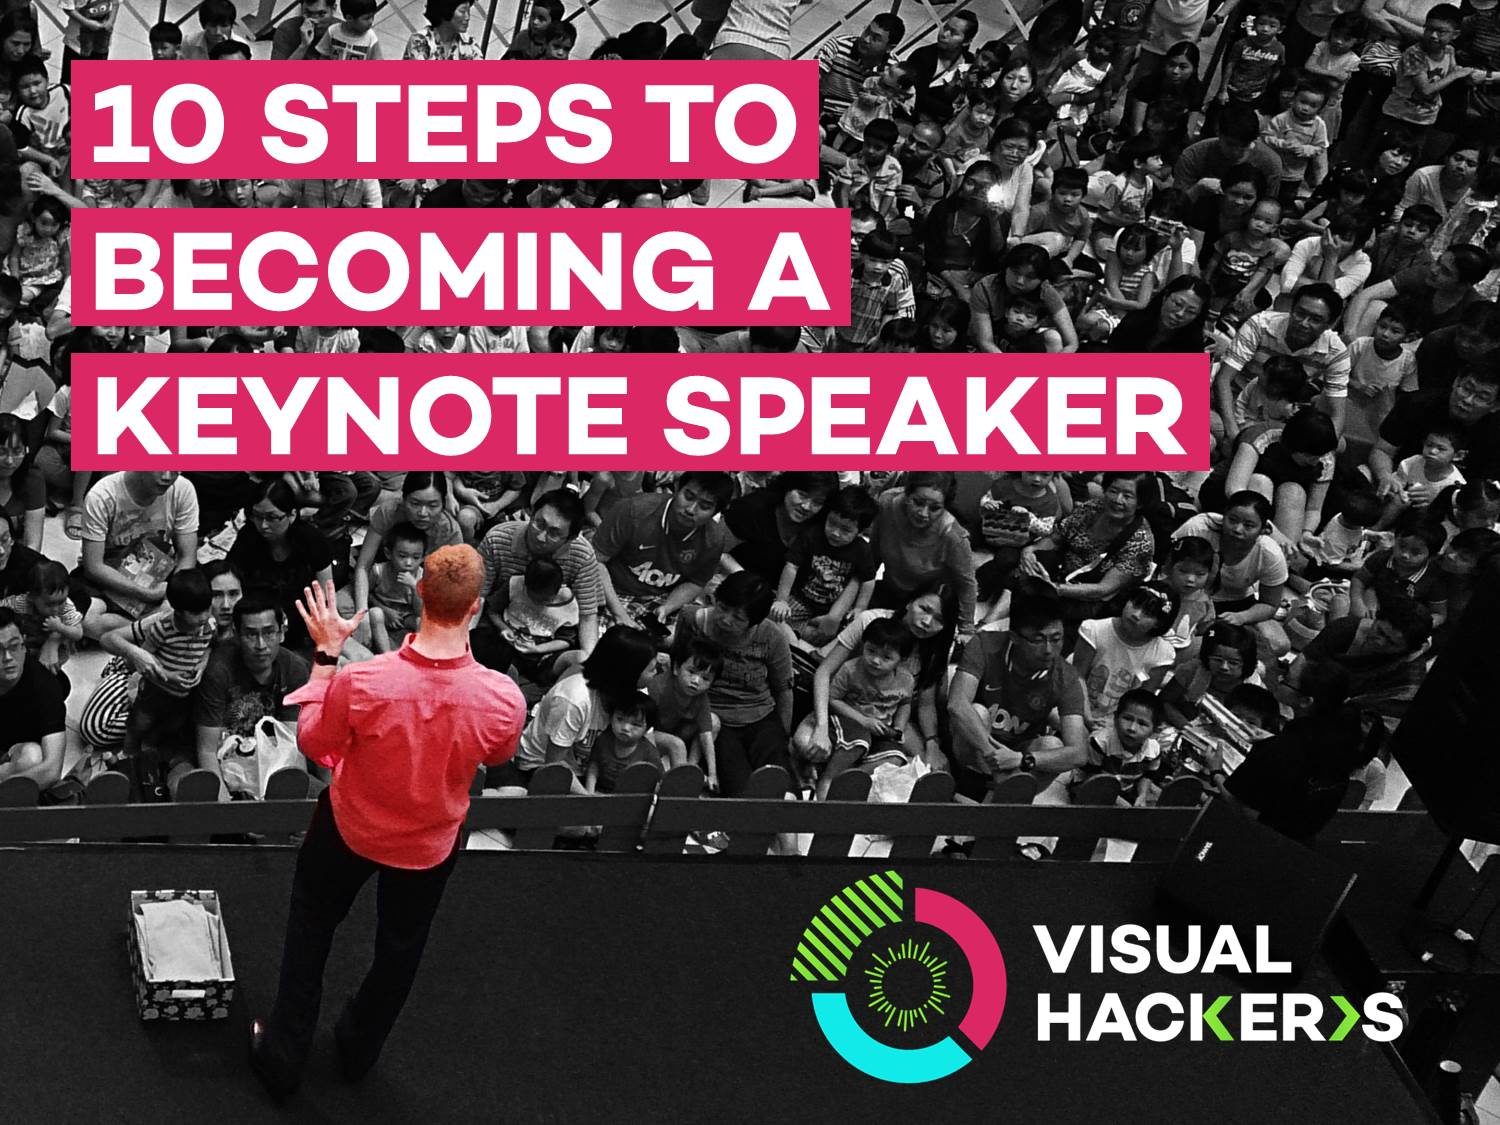 10 Steps to becoming a Keynote Speaker 0